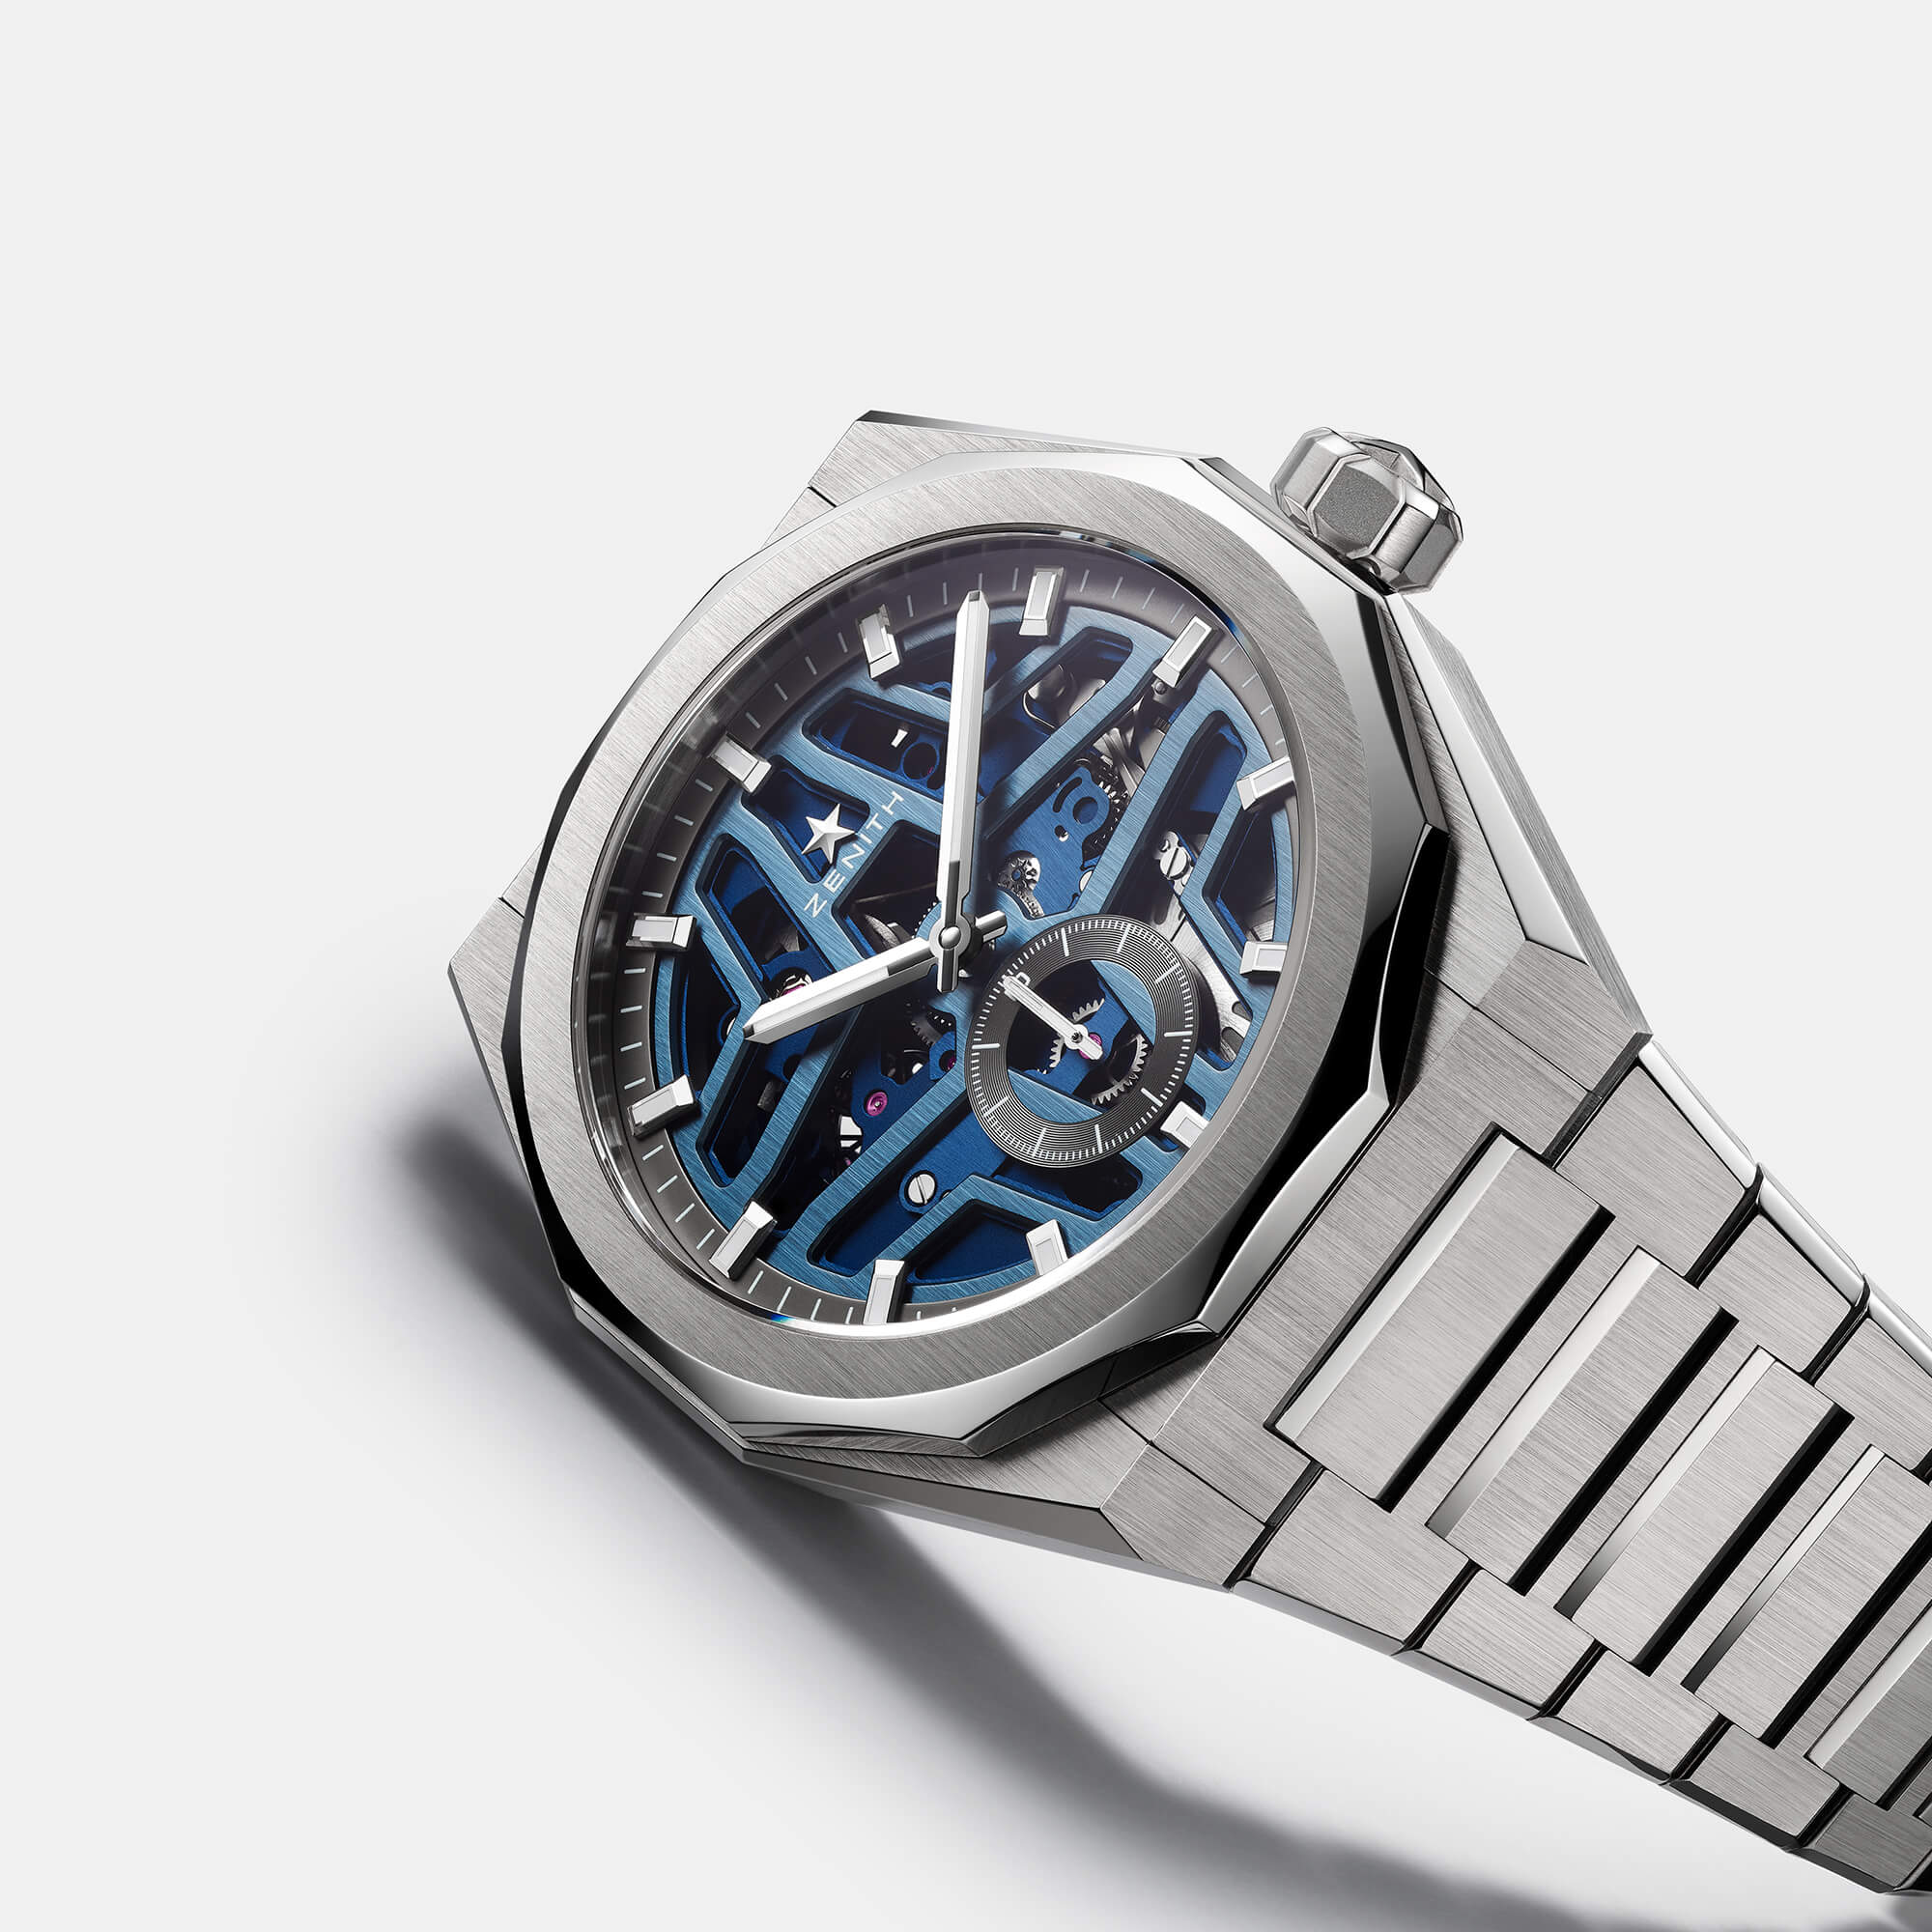 Introducing The Zenith Defy Skyline Watches –